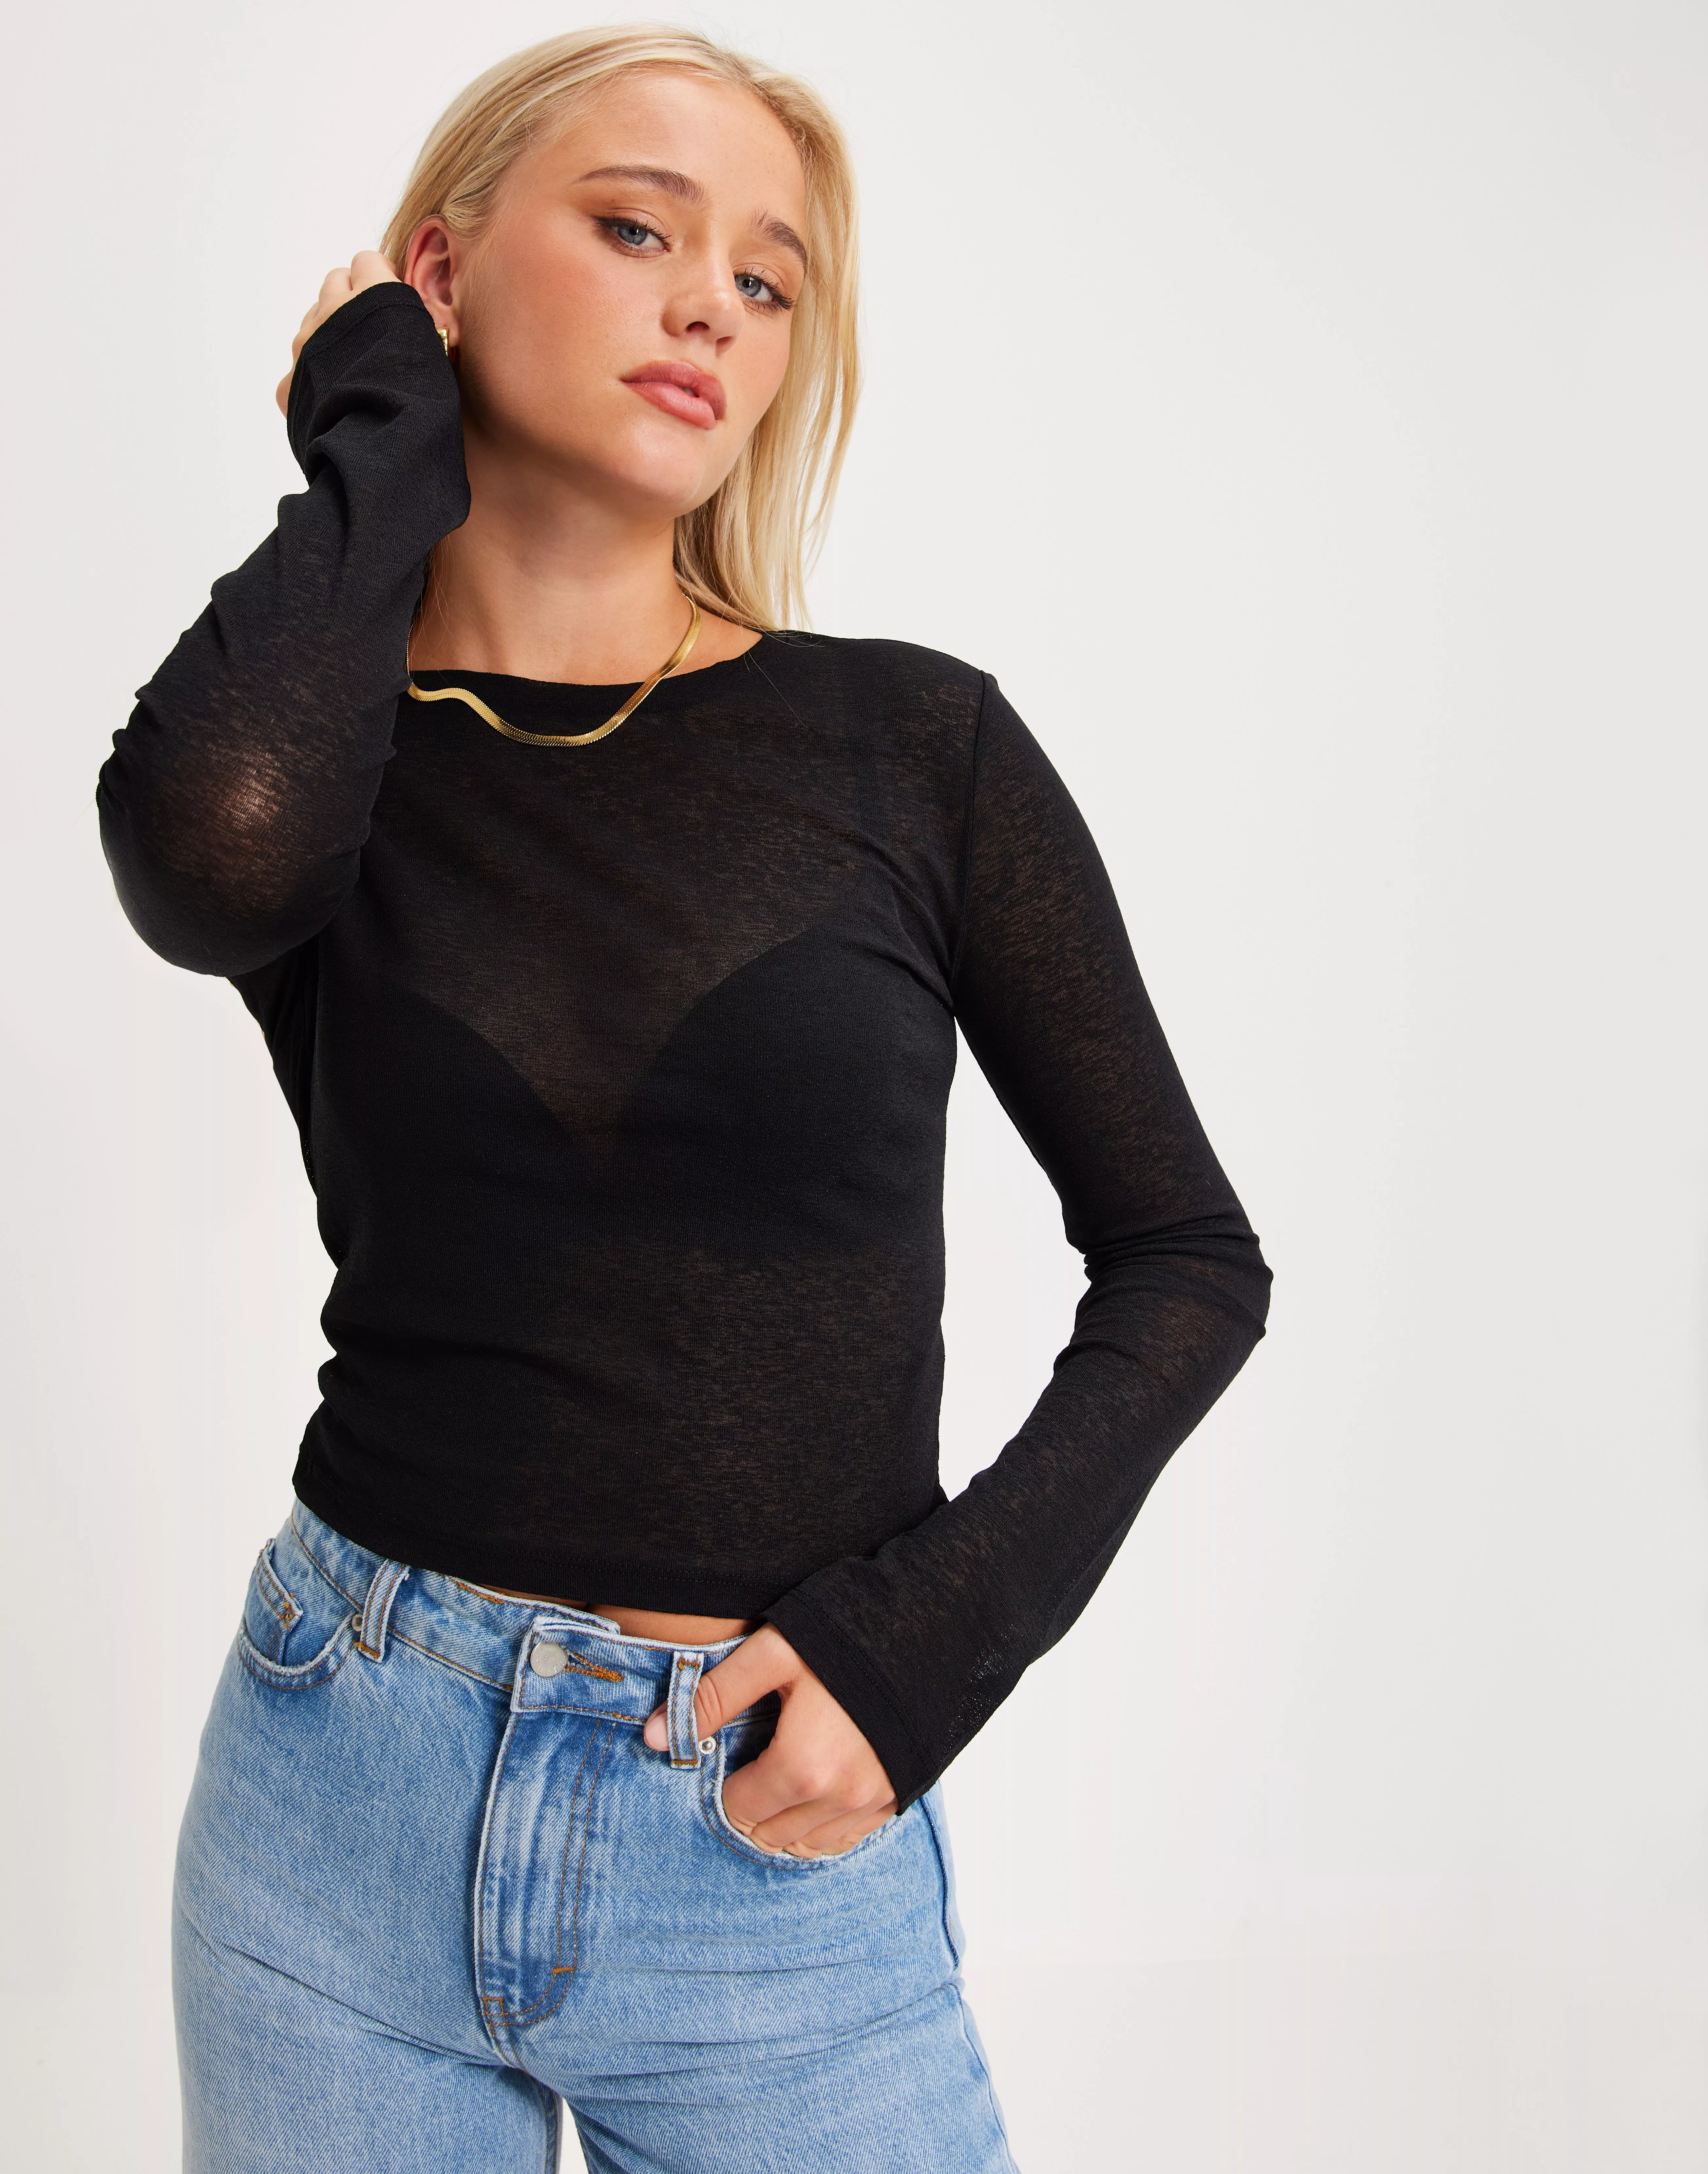 Buy Nelly Perfect Sheer Top - Black